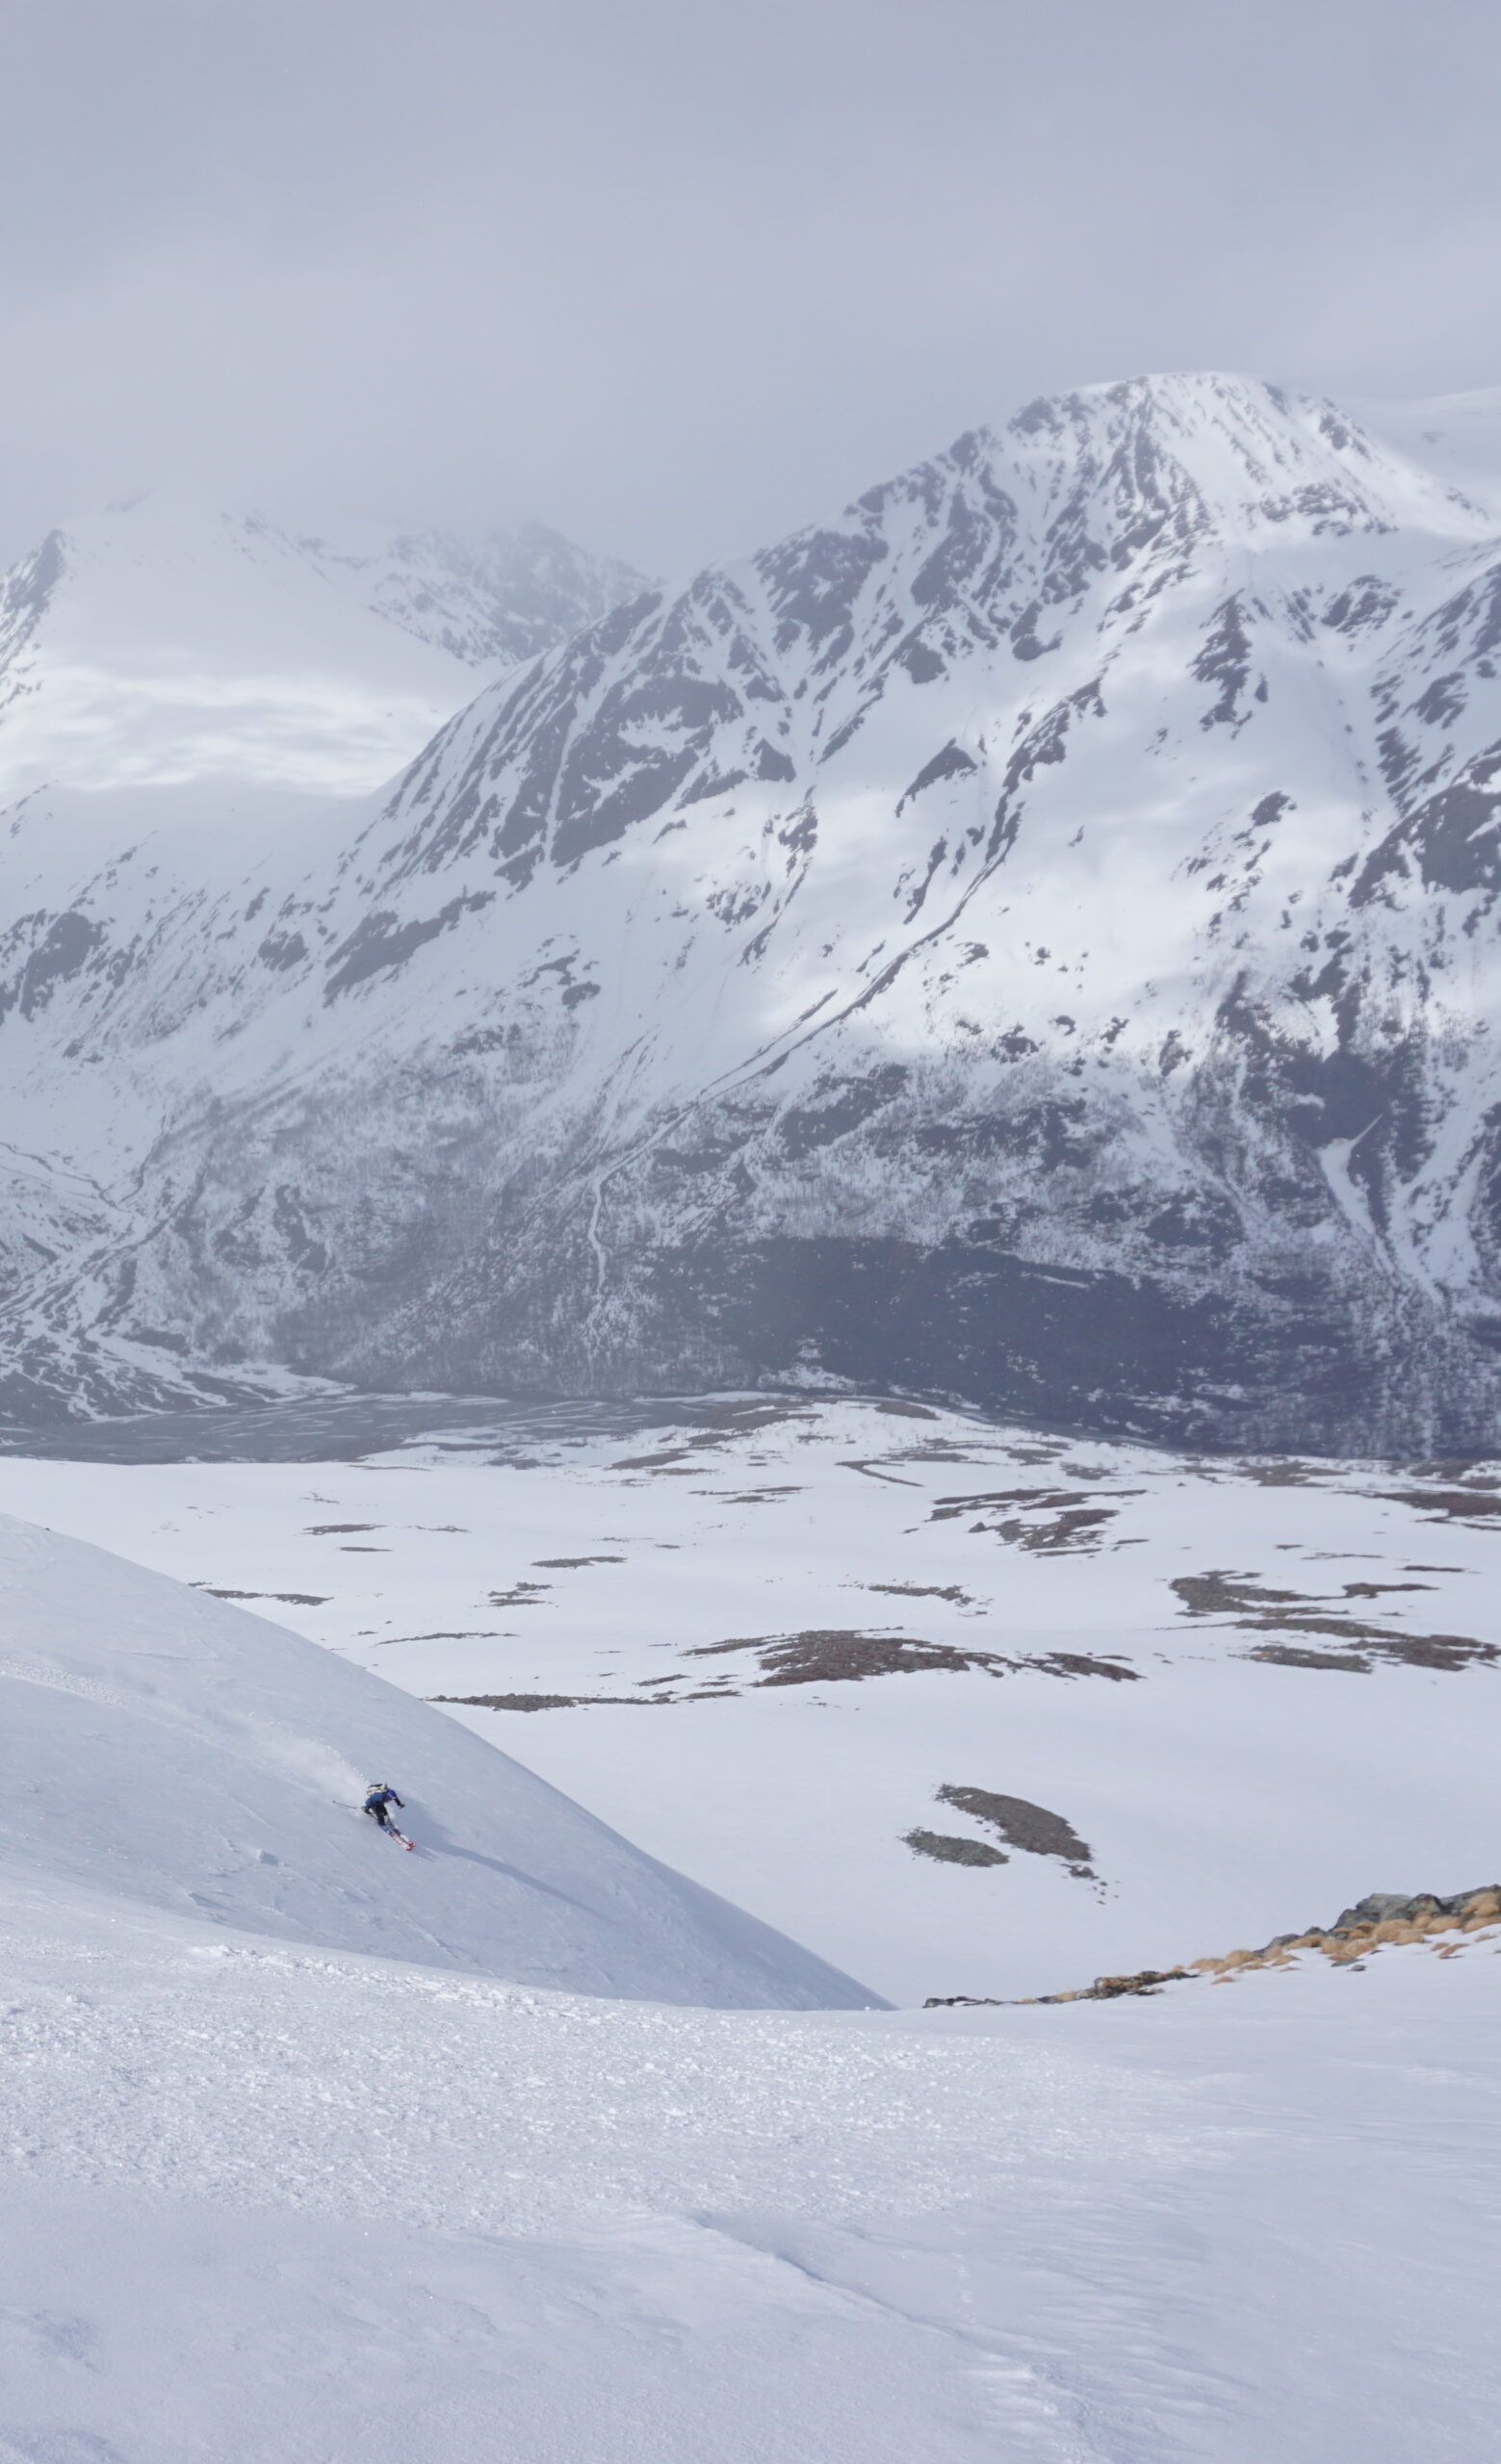 Making powder turns down the Northwest bowl of Daltinden in the Lyngen Alps of Norway